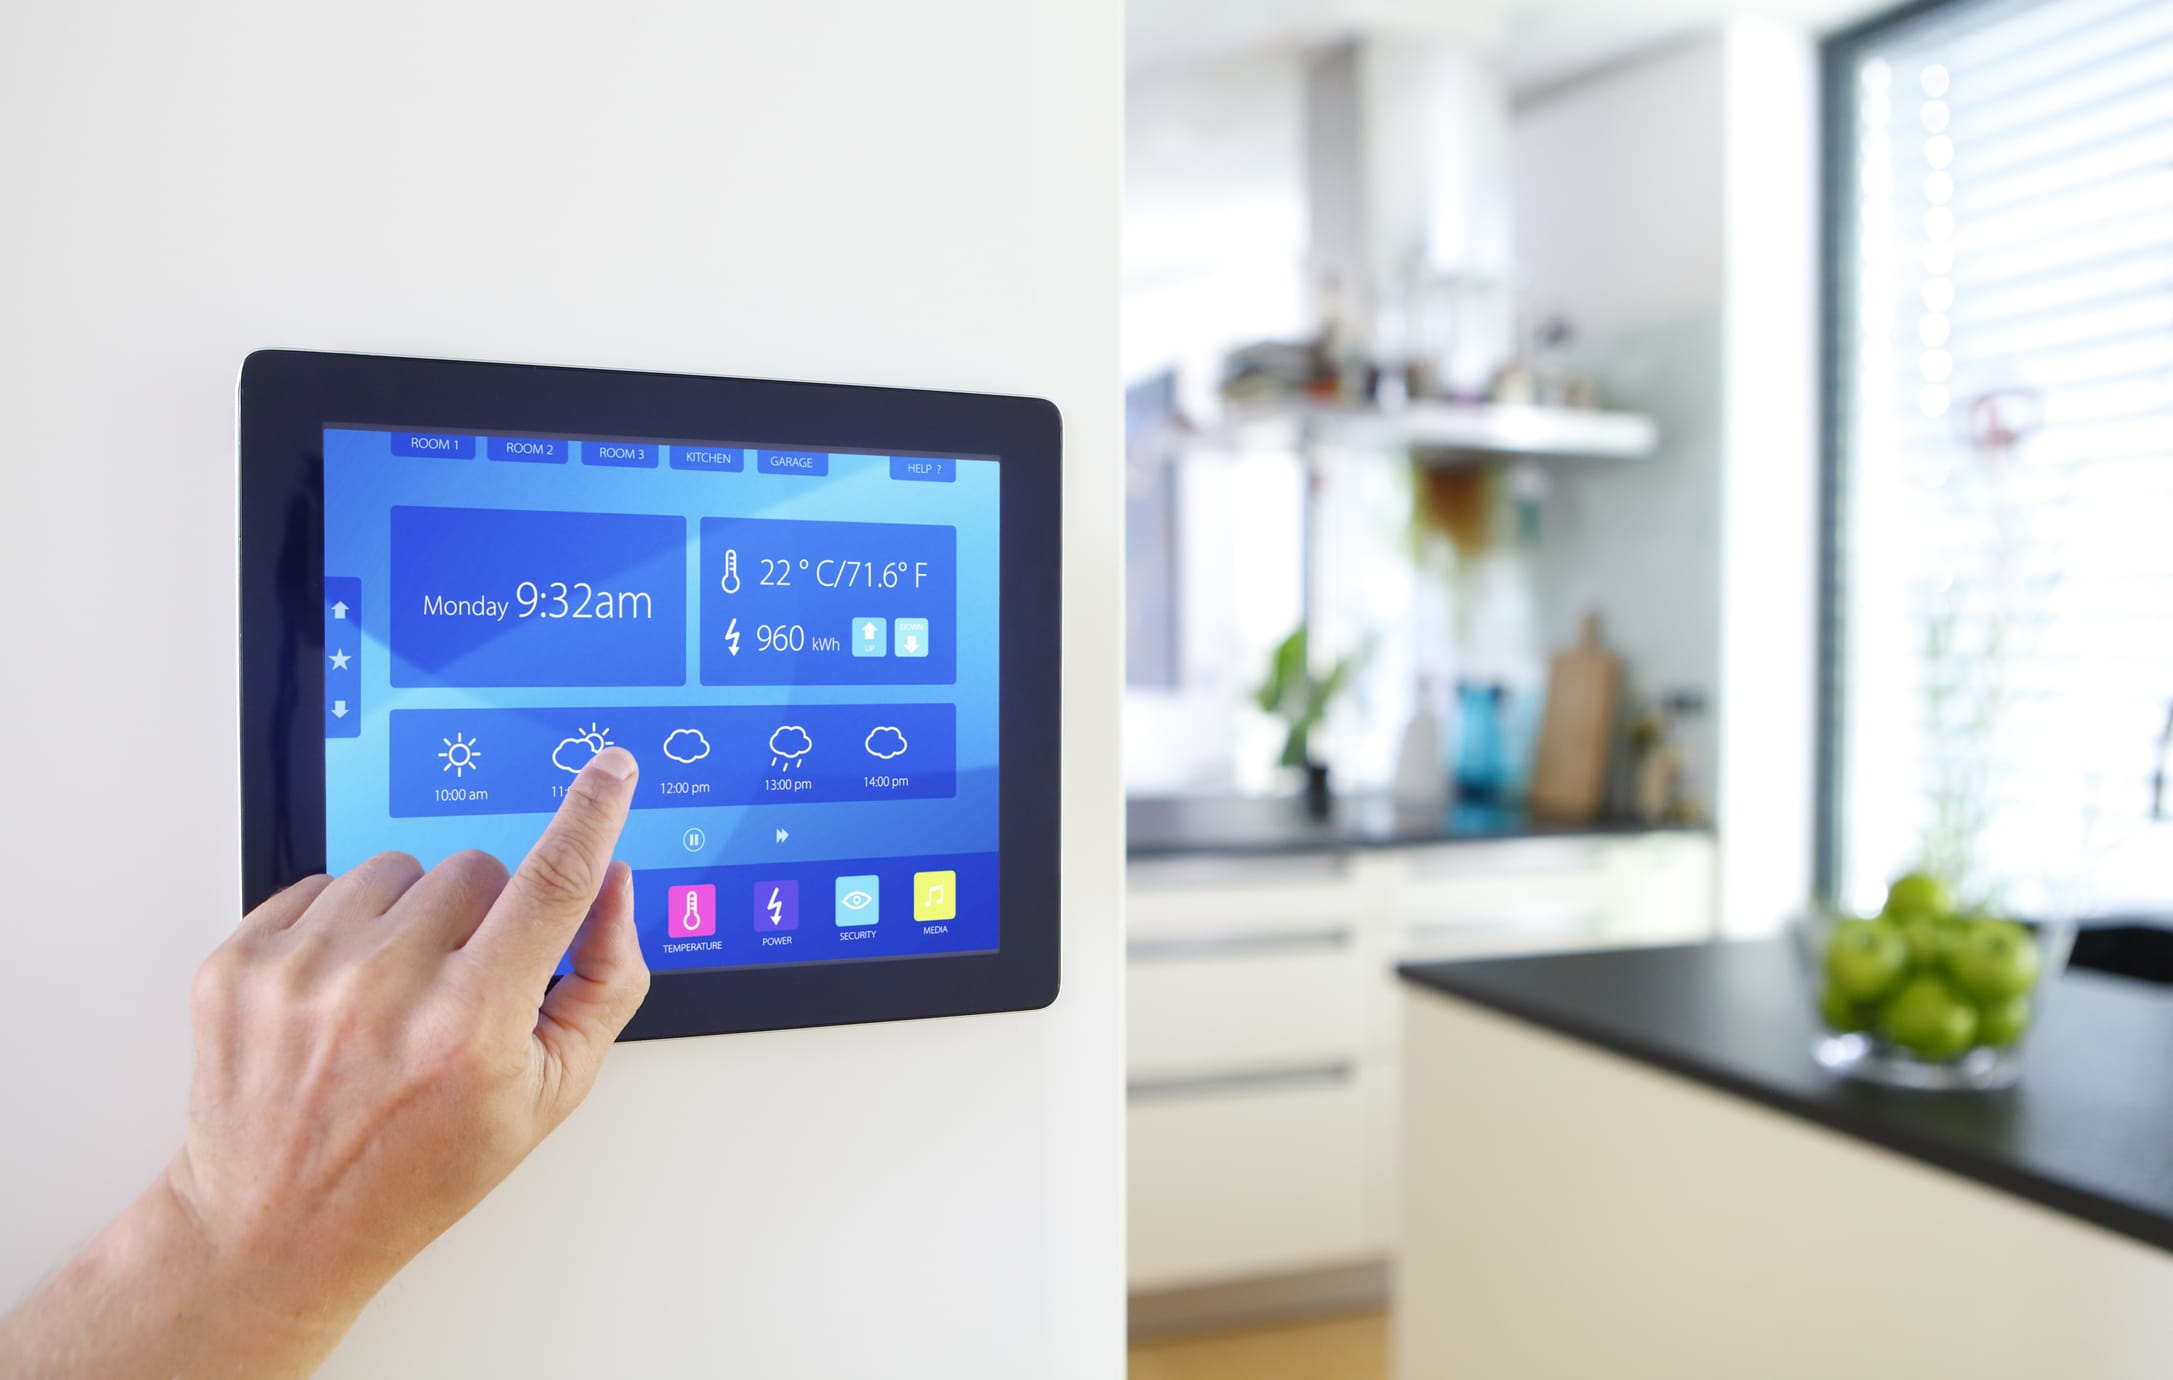 Security Systems Cheshire Home Security Control Panel